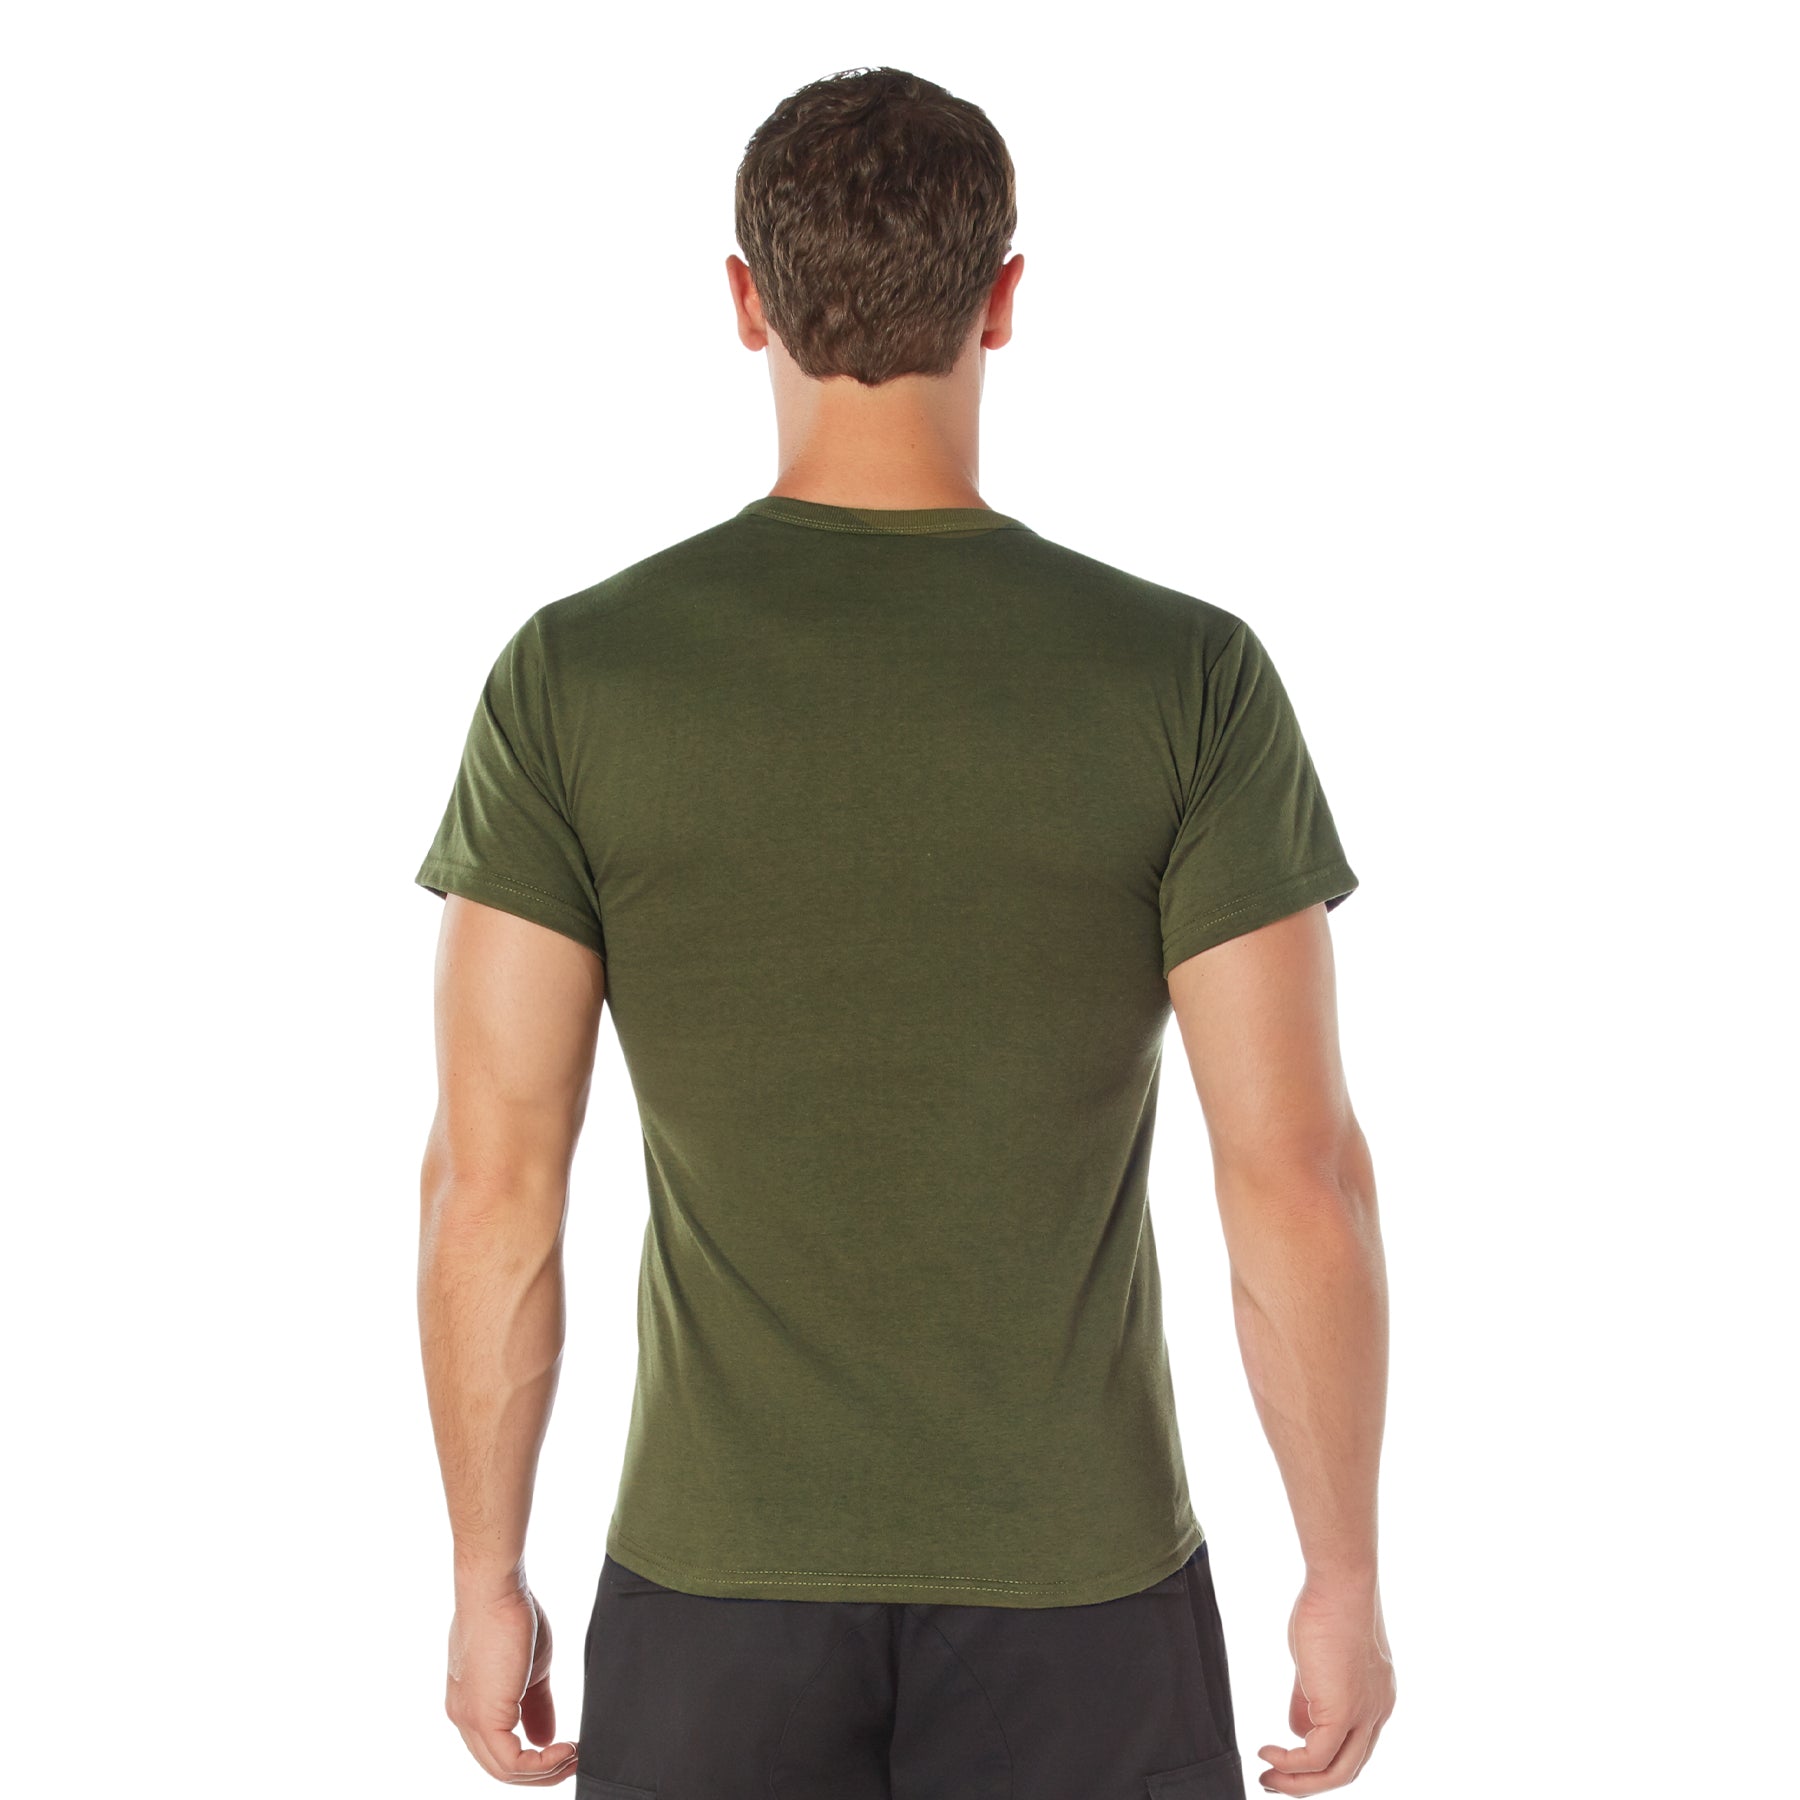 [Military] Poly/Cotton Army Physical Training T-Shirts